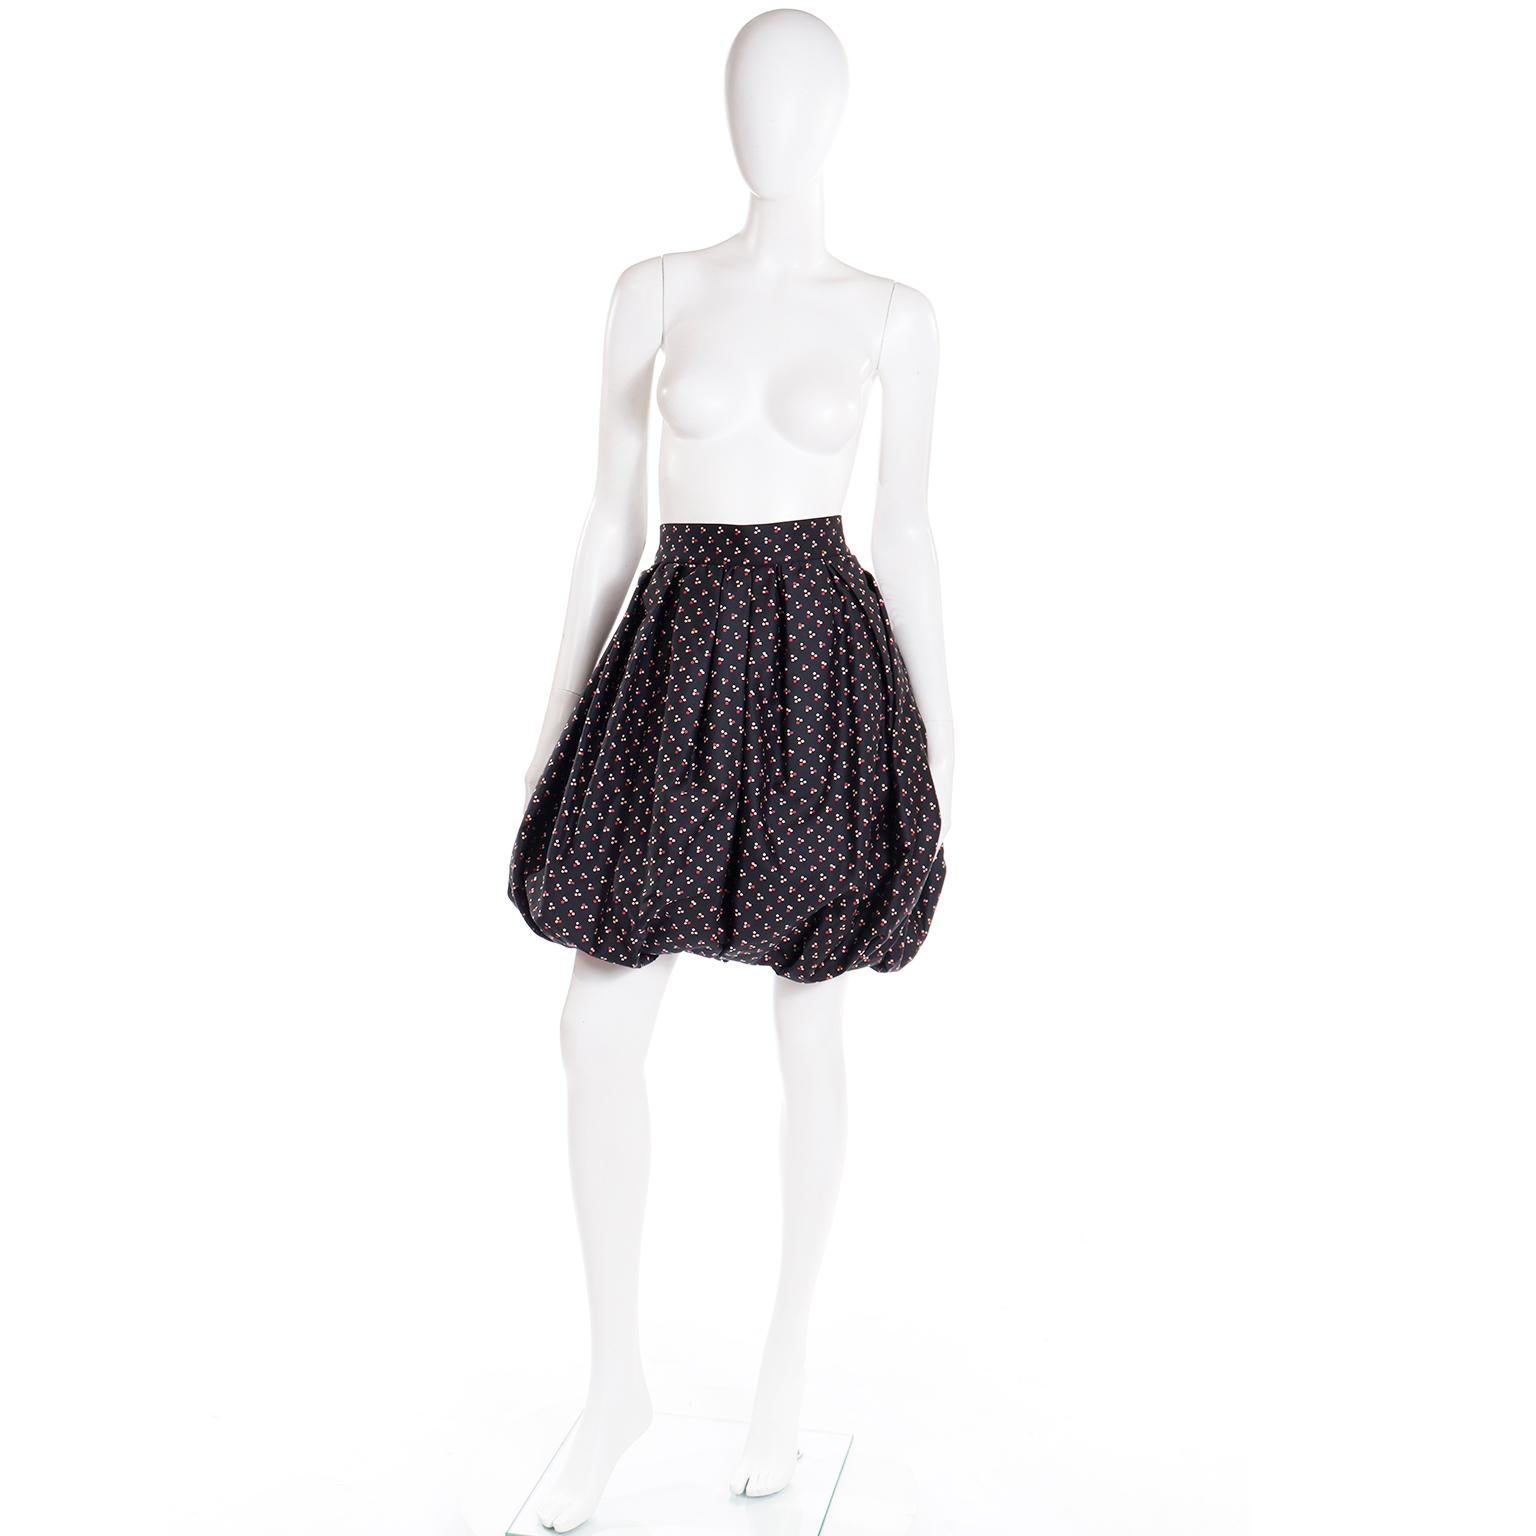 This is such a unique design for Thierry Mugler! This black cotton bubble skirt has tiny squares in shades of pink and cream. The skirt has a fixed waist with snaps and a hidden zipper and hook and eye for closure. Such a fun skirt to pair with a